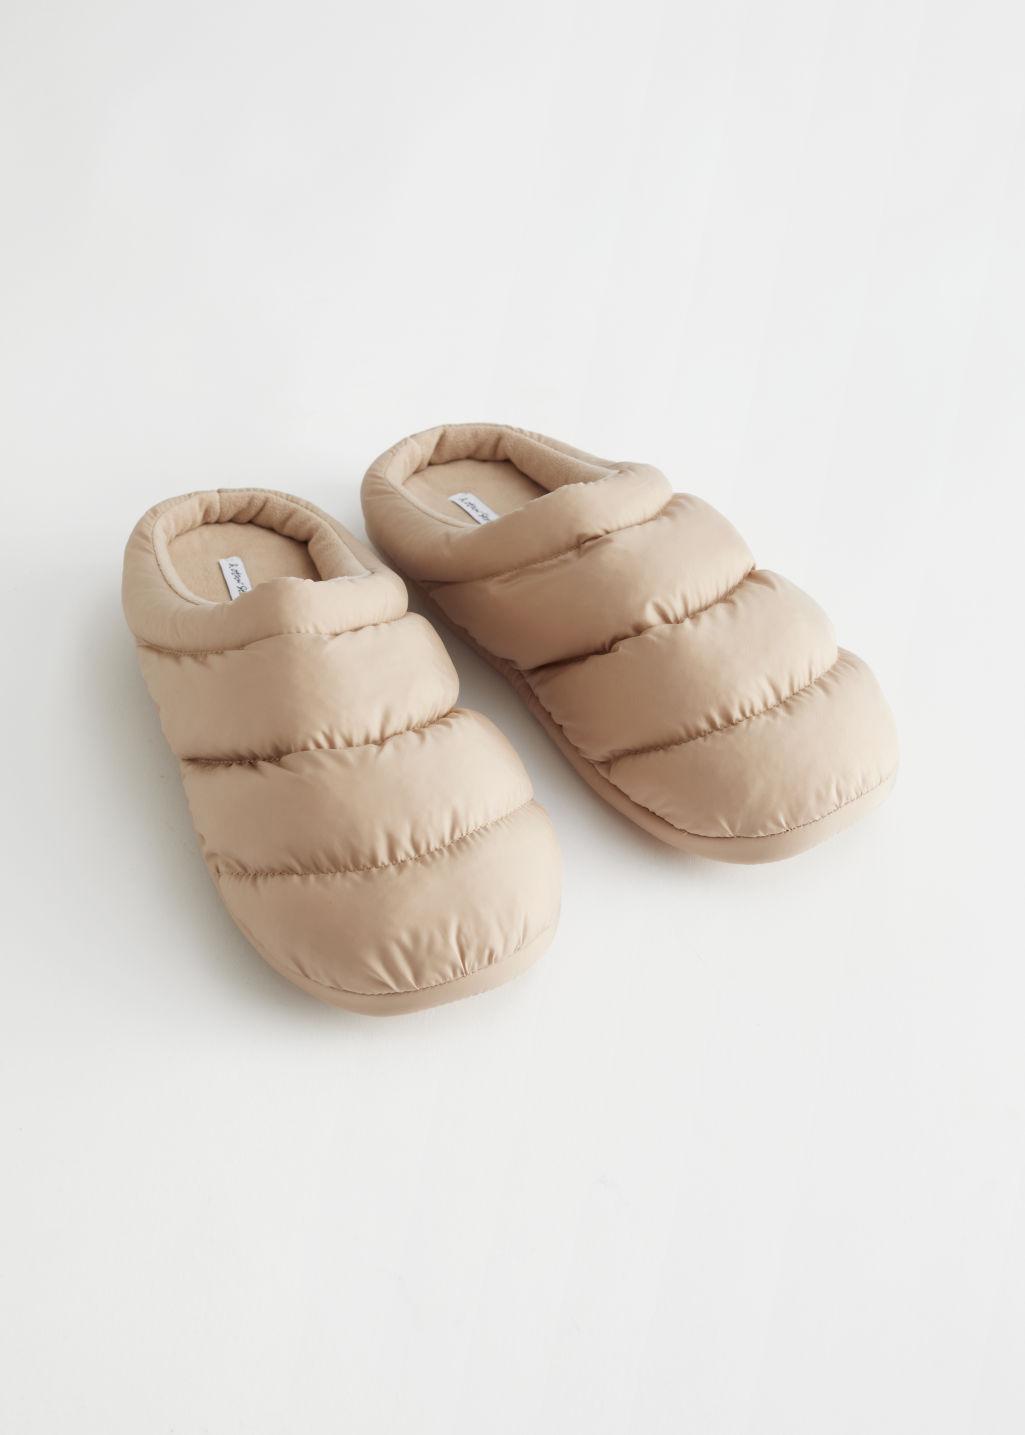 & Other Stories Synthetic Padded Slippers in Beige (Natural) - Lyst